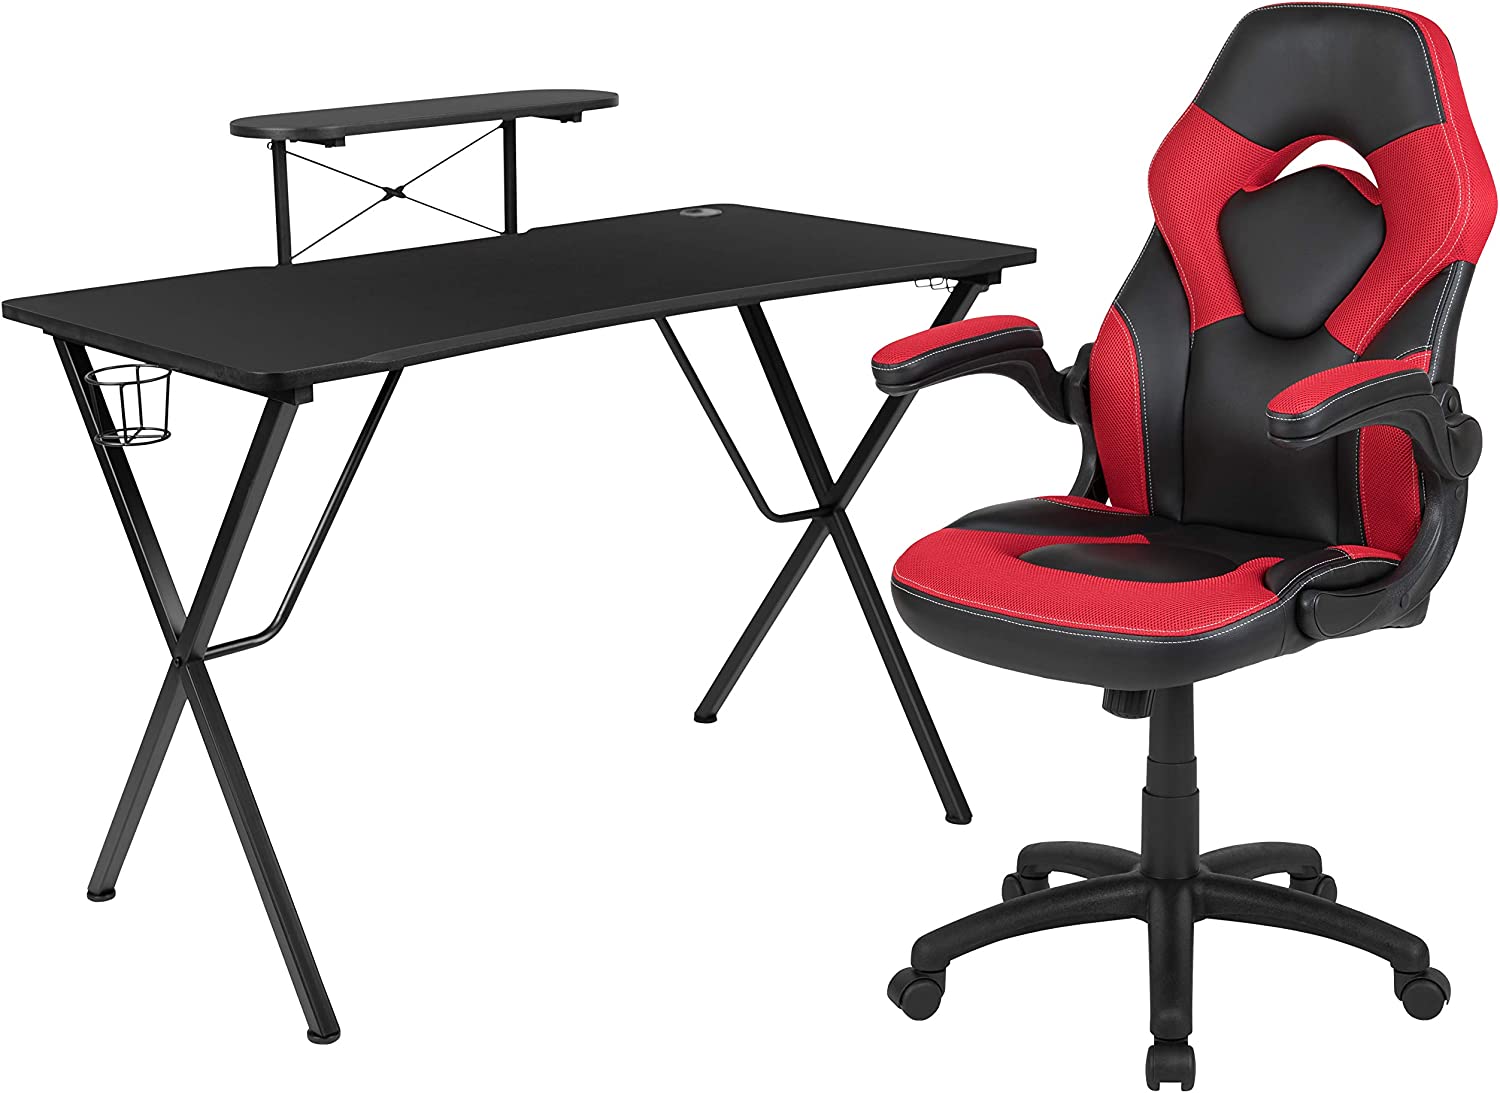 Flash Furniture Black Gaming Desk and Red/Black Racing Chair Set with Cup Holder, Headphone Hook, and Monitor/Smartphone Stand